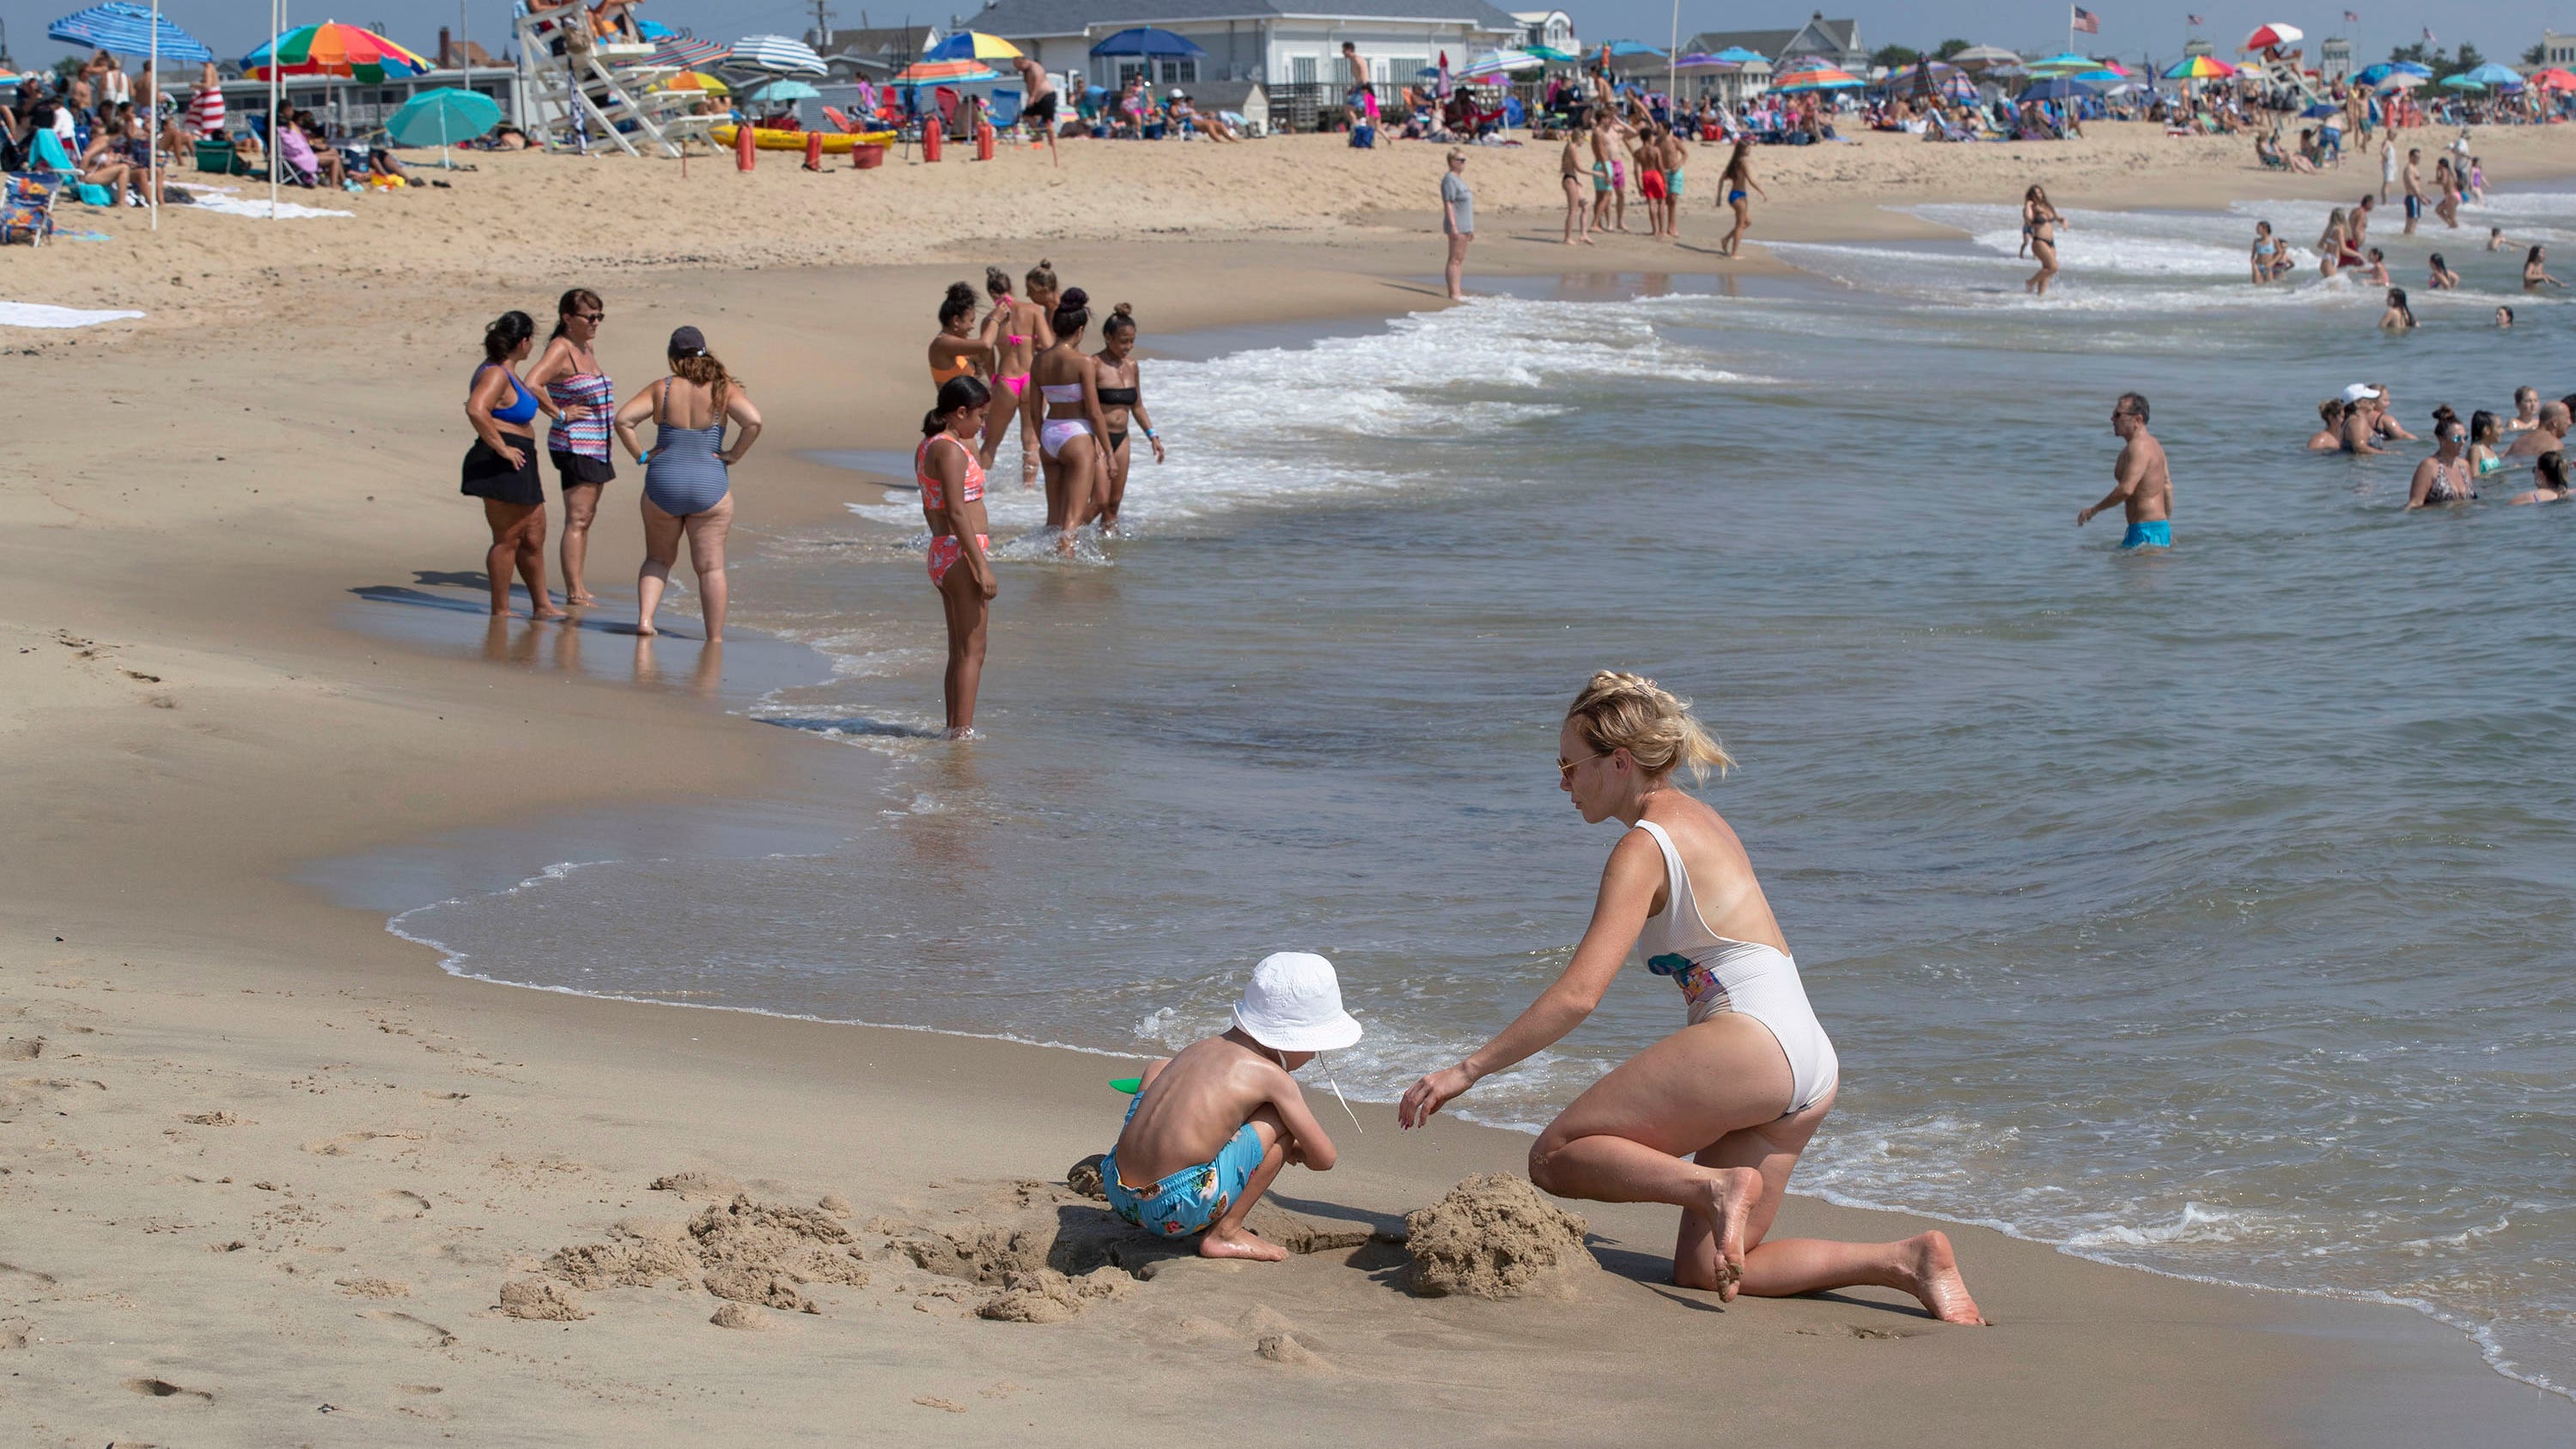 Map highlighting popular paid beaches on the New Jersey Shore